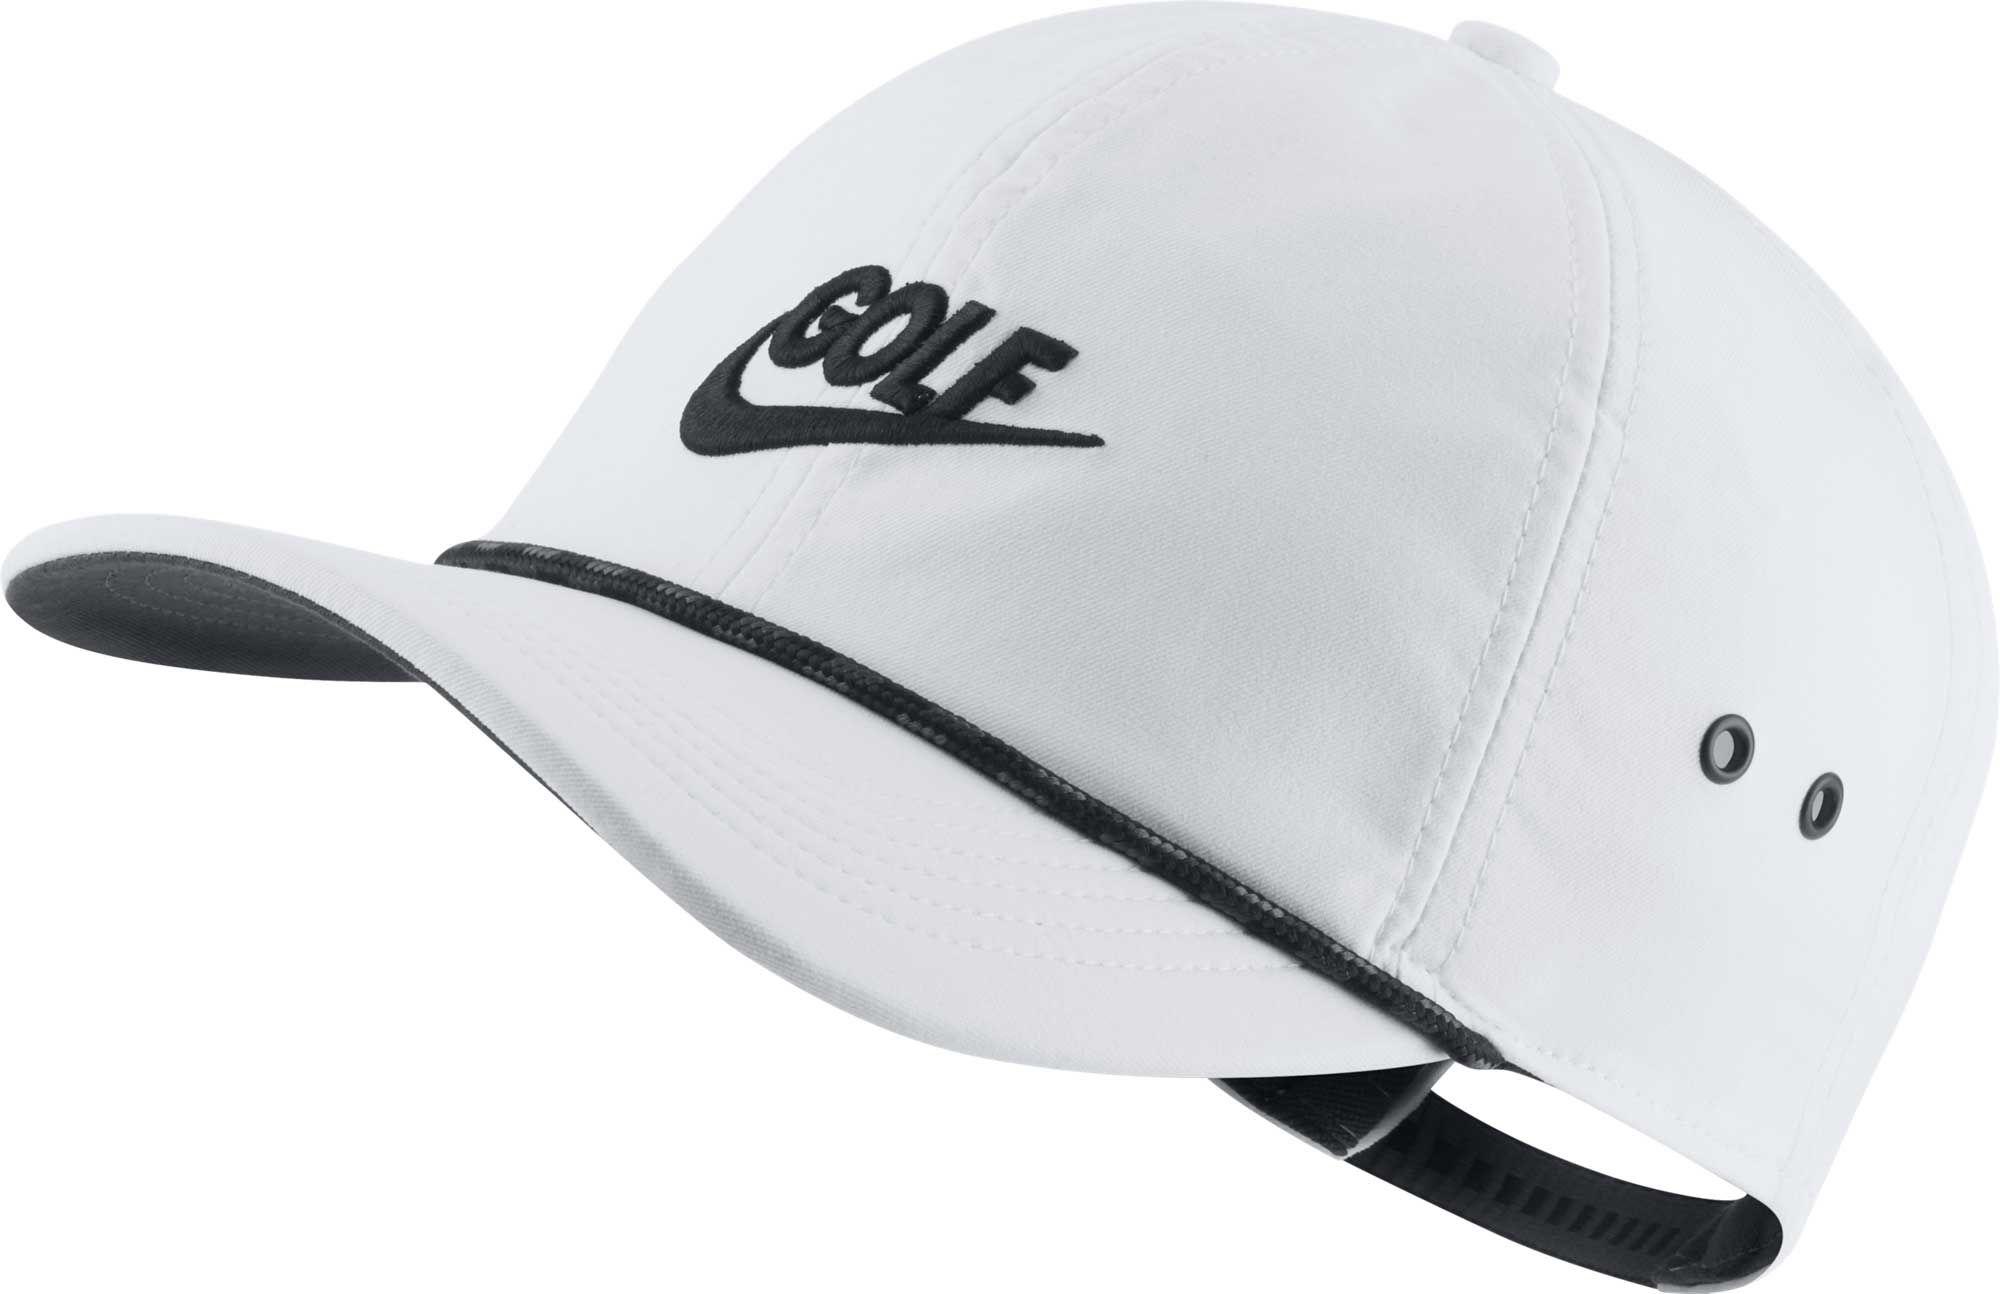 nike men's 2020 aerobill classic99 perforated golf hat